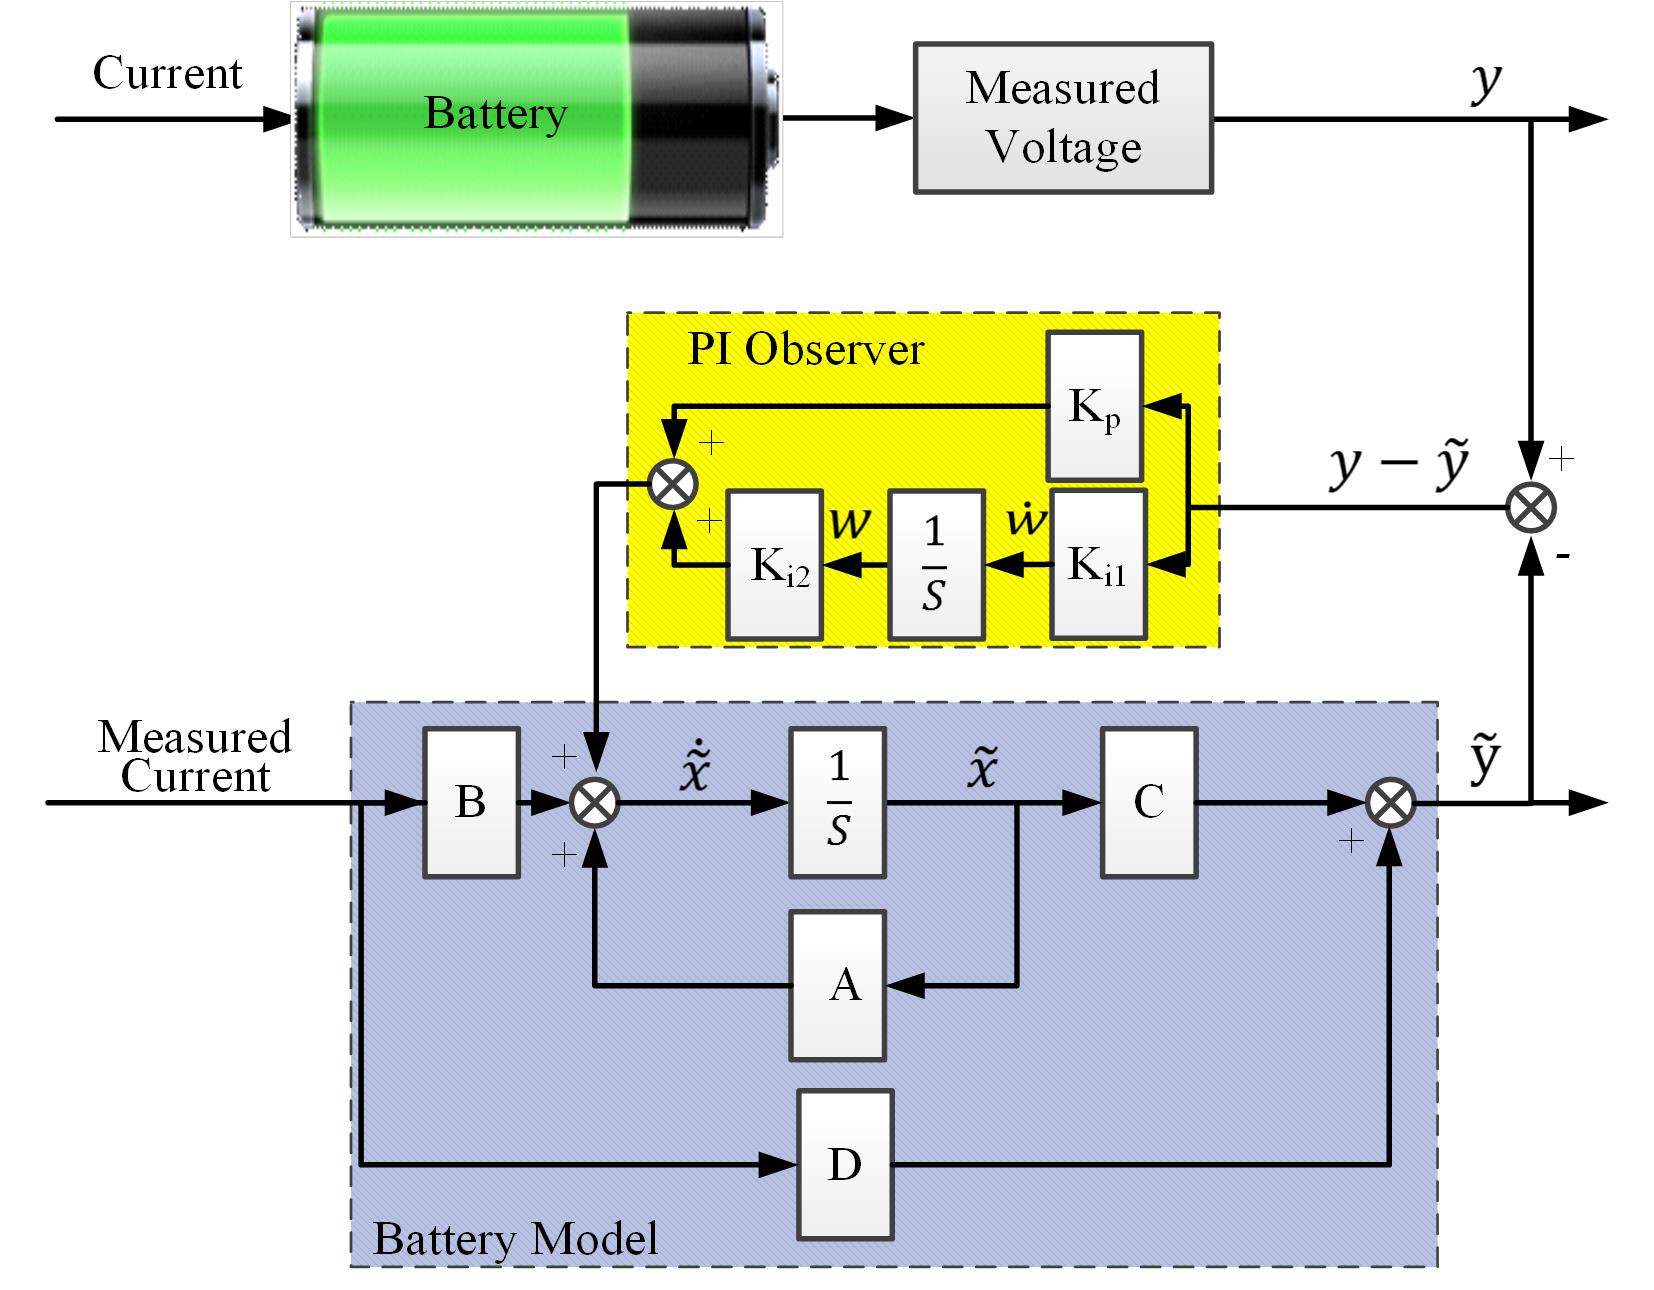 Electrical battery. Battery Electric scheme. Electric vehicle Battery. Battery Management System schematic. Battery scheme.